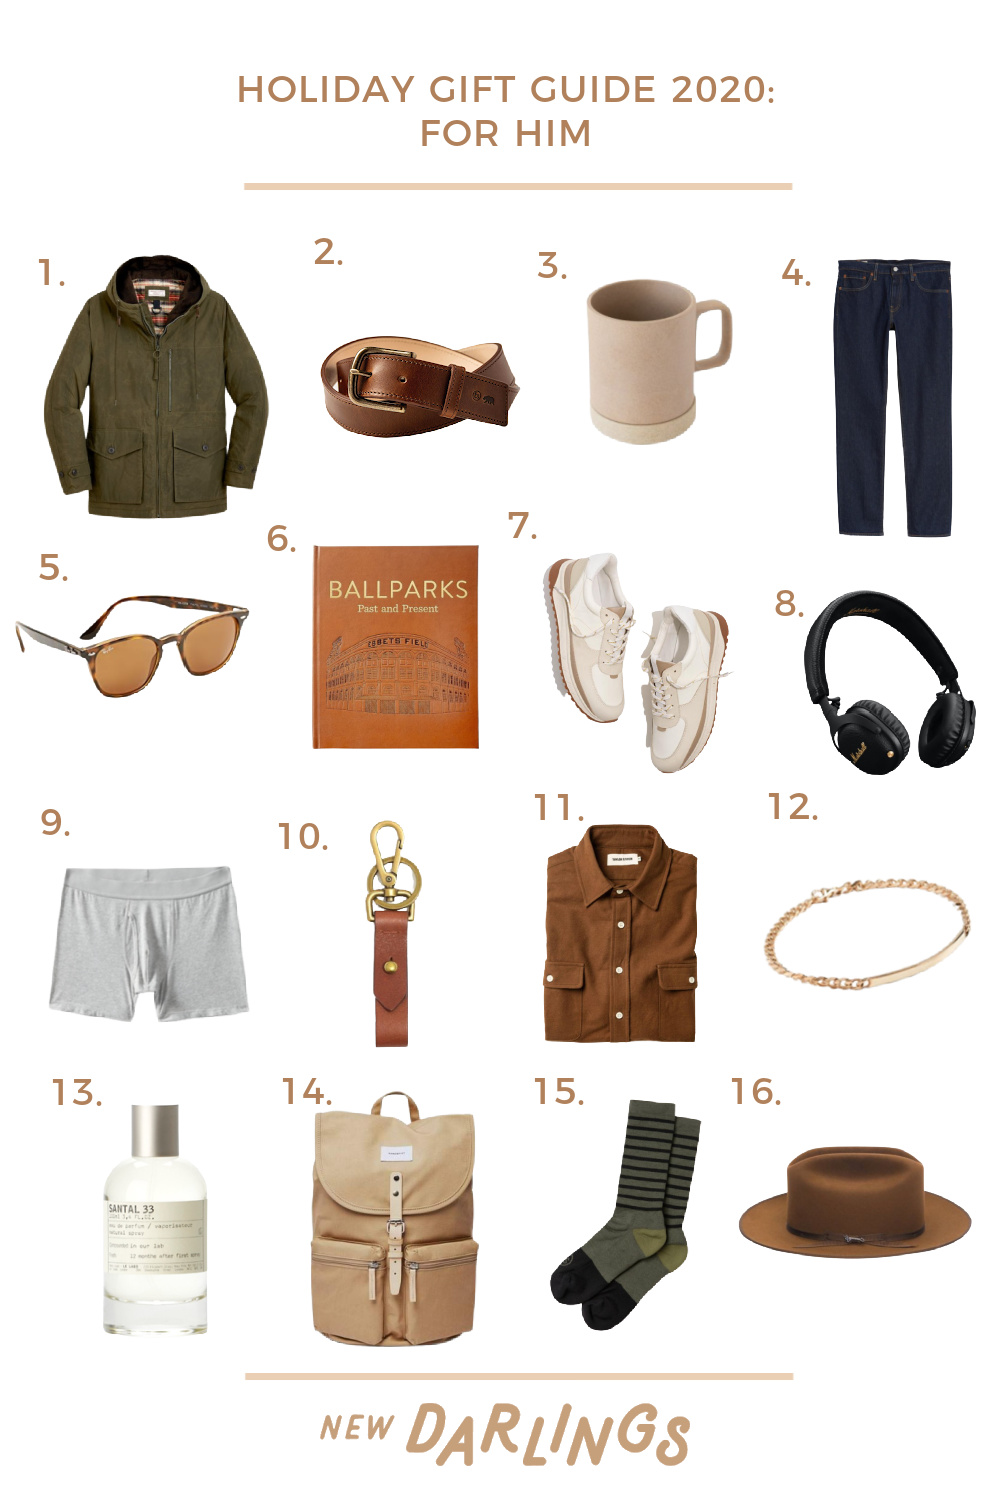 Mens Holiday Gift Guide